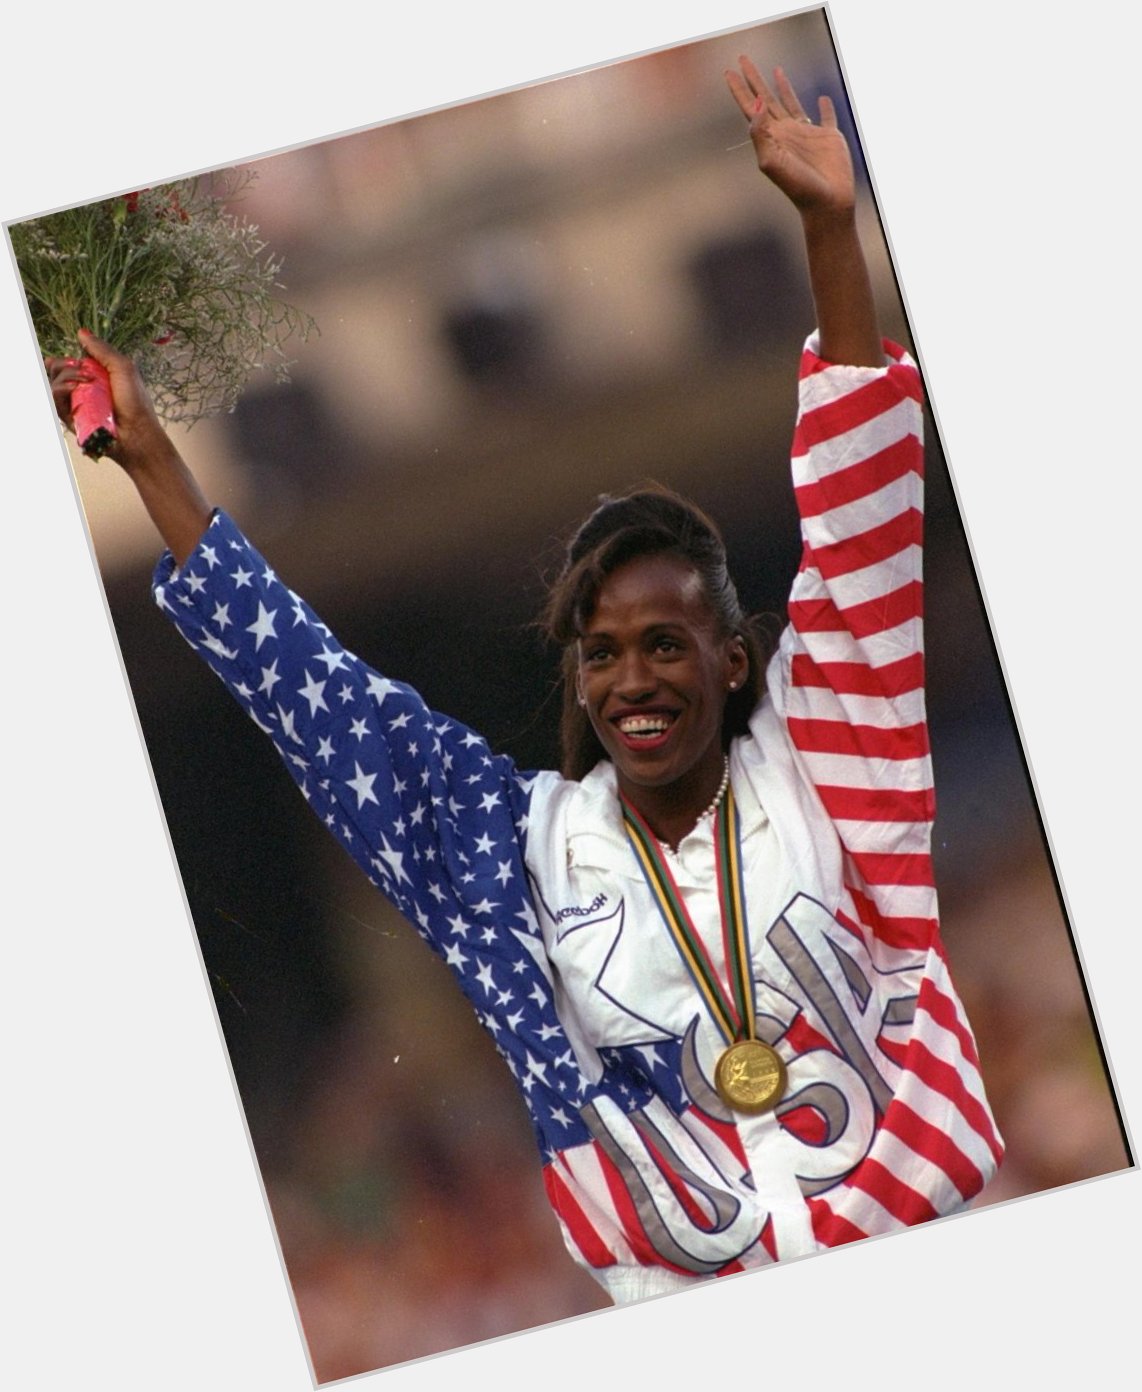 Happy birthday to Jackie Joyner-Kersee, a three-time Olympic gold medalist for the long jump and heptathlon! 